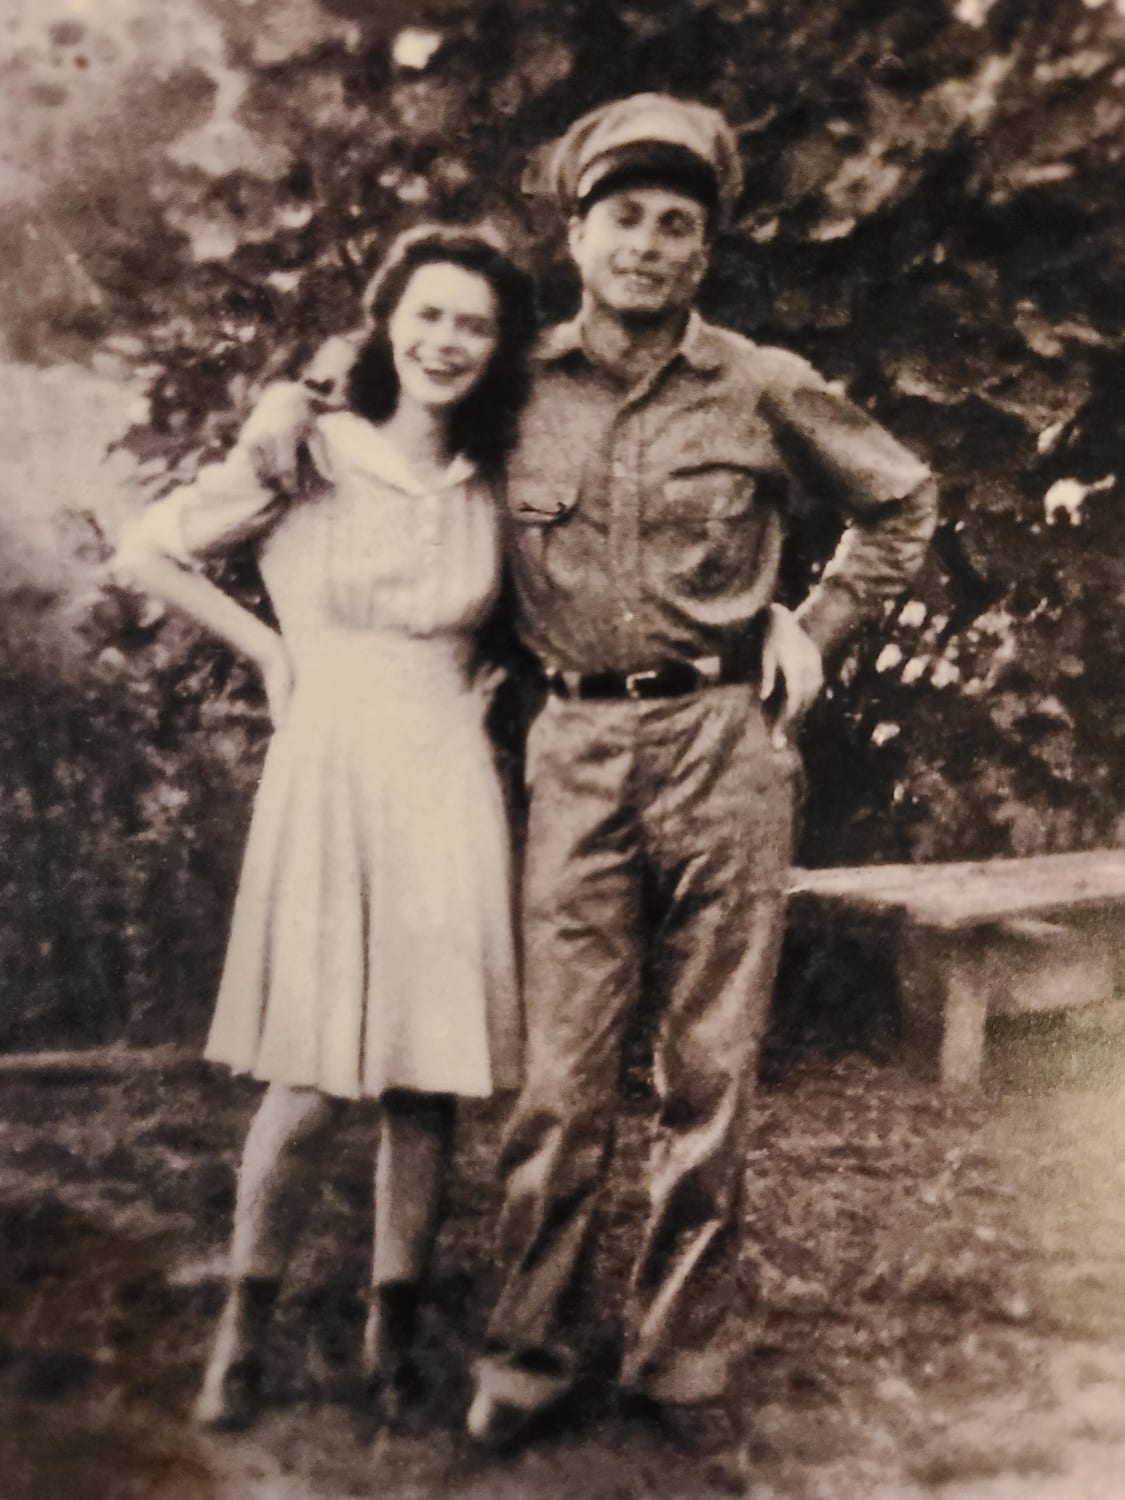 Grandma and Papa in 1937. She passed away today at 100 years old.